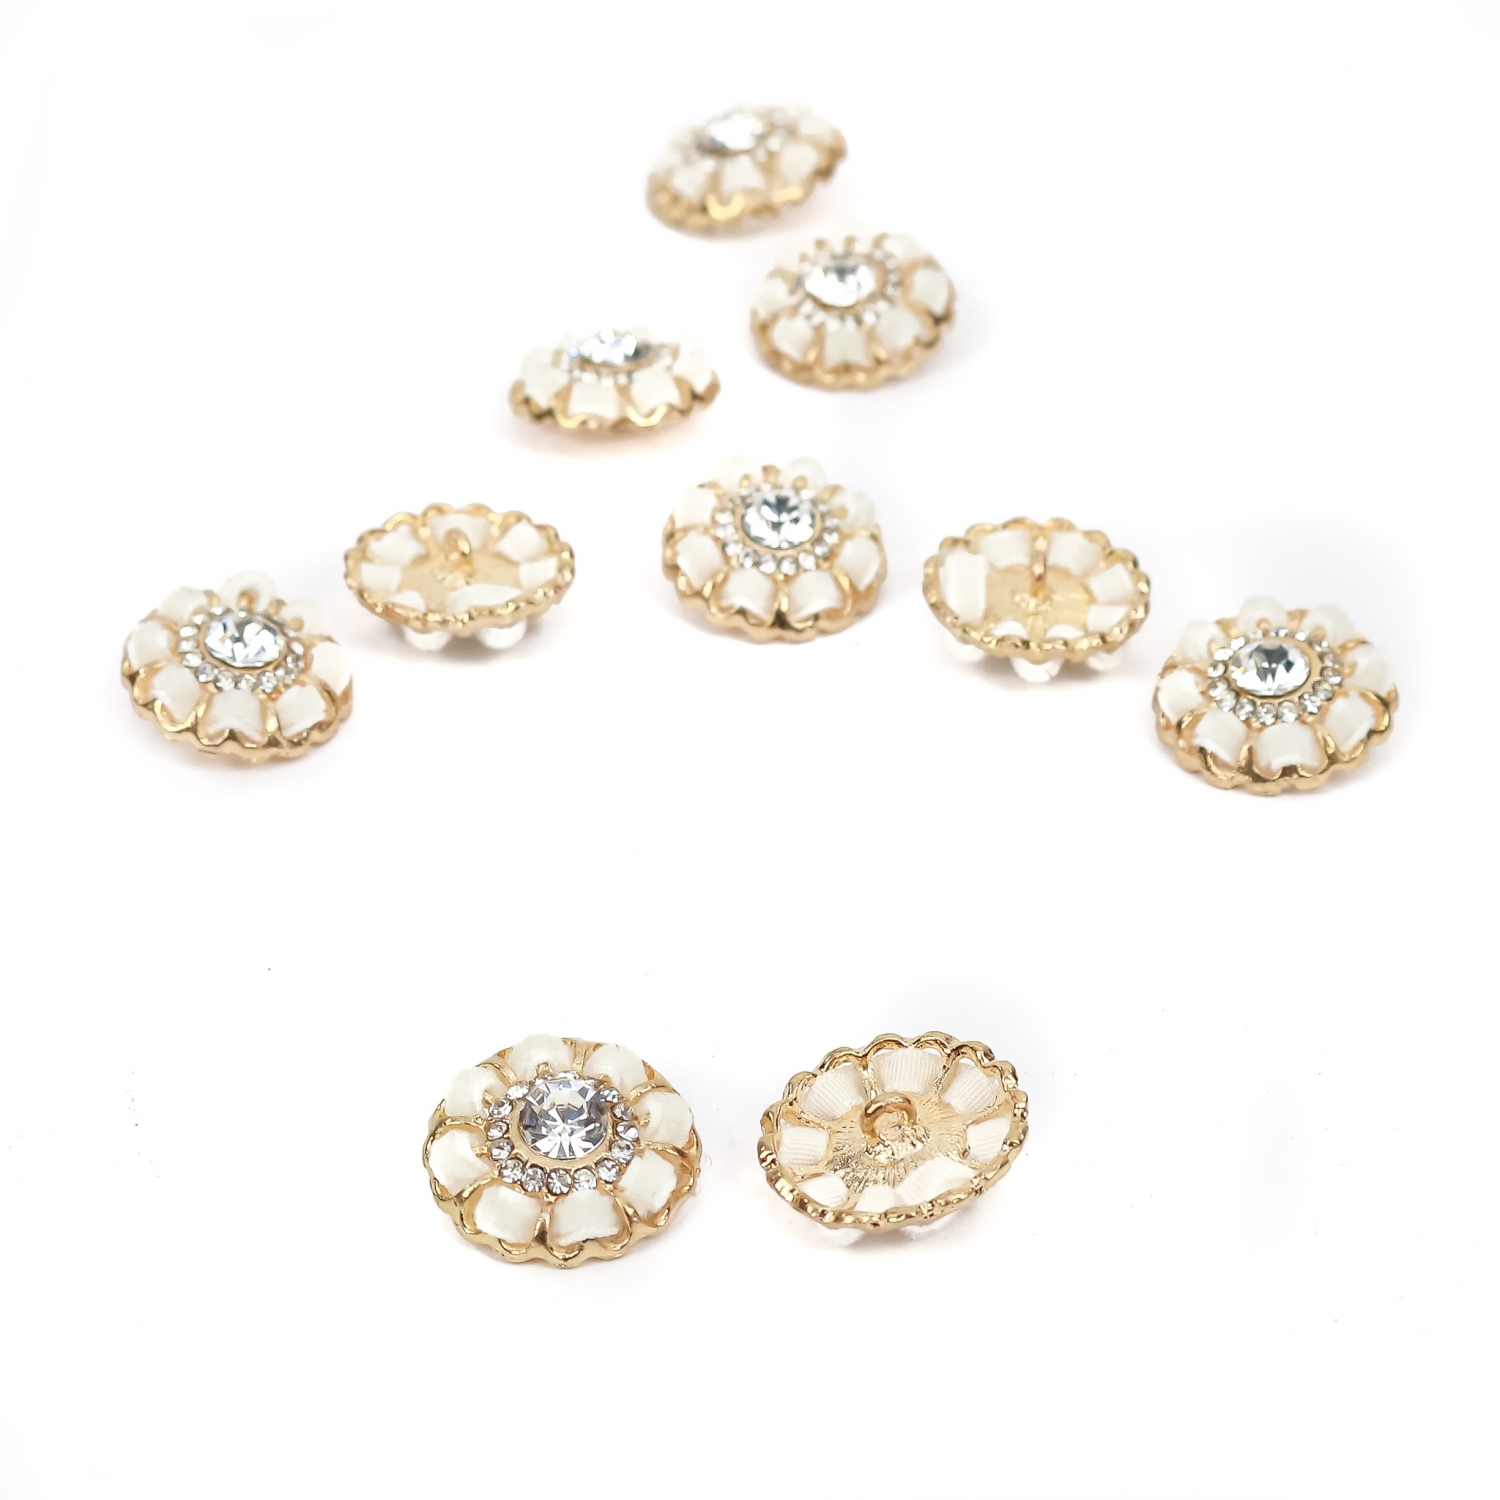 Shank Buttons with Rhinestones, Size 20 mm (10 pcs/pack) Code: BT1192